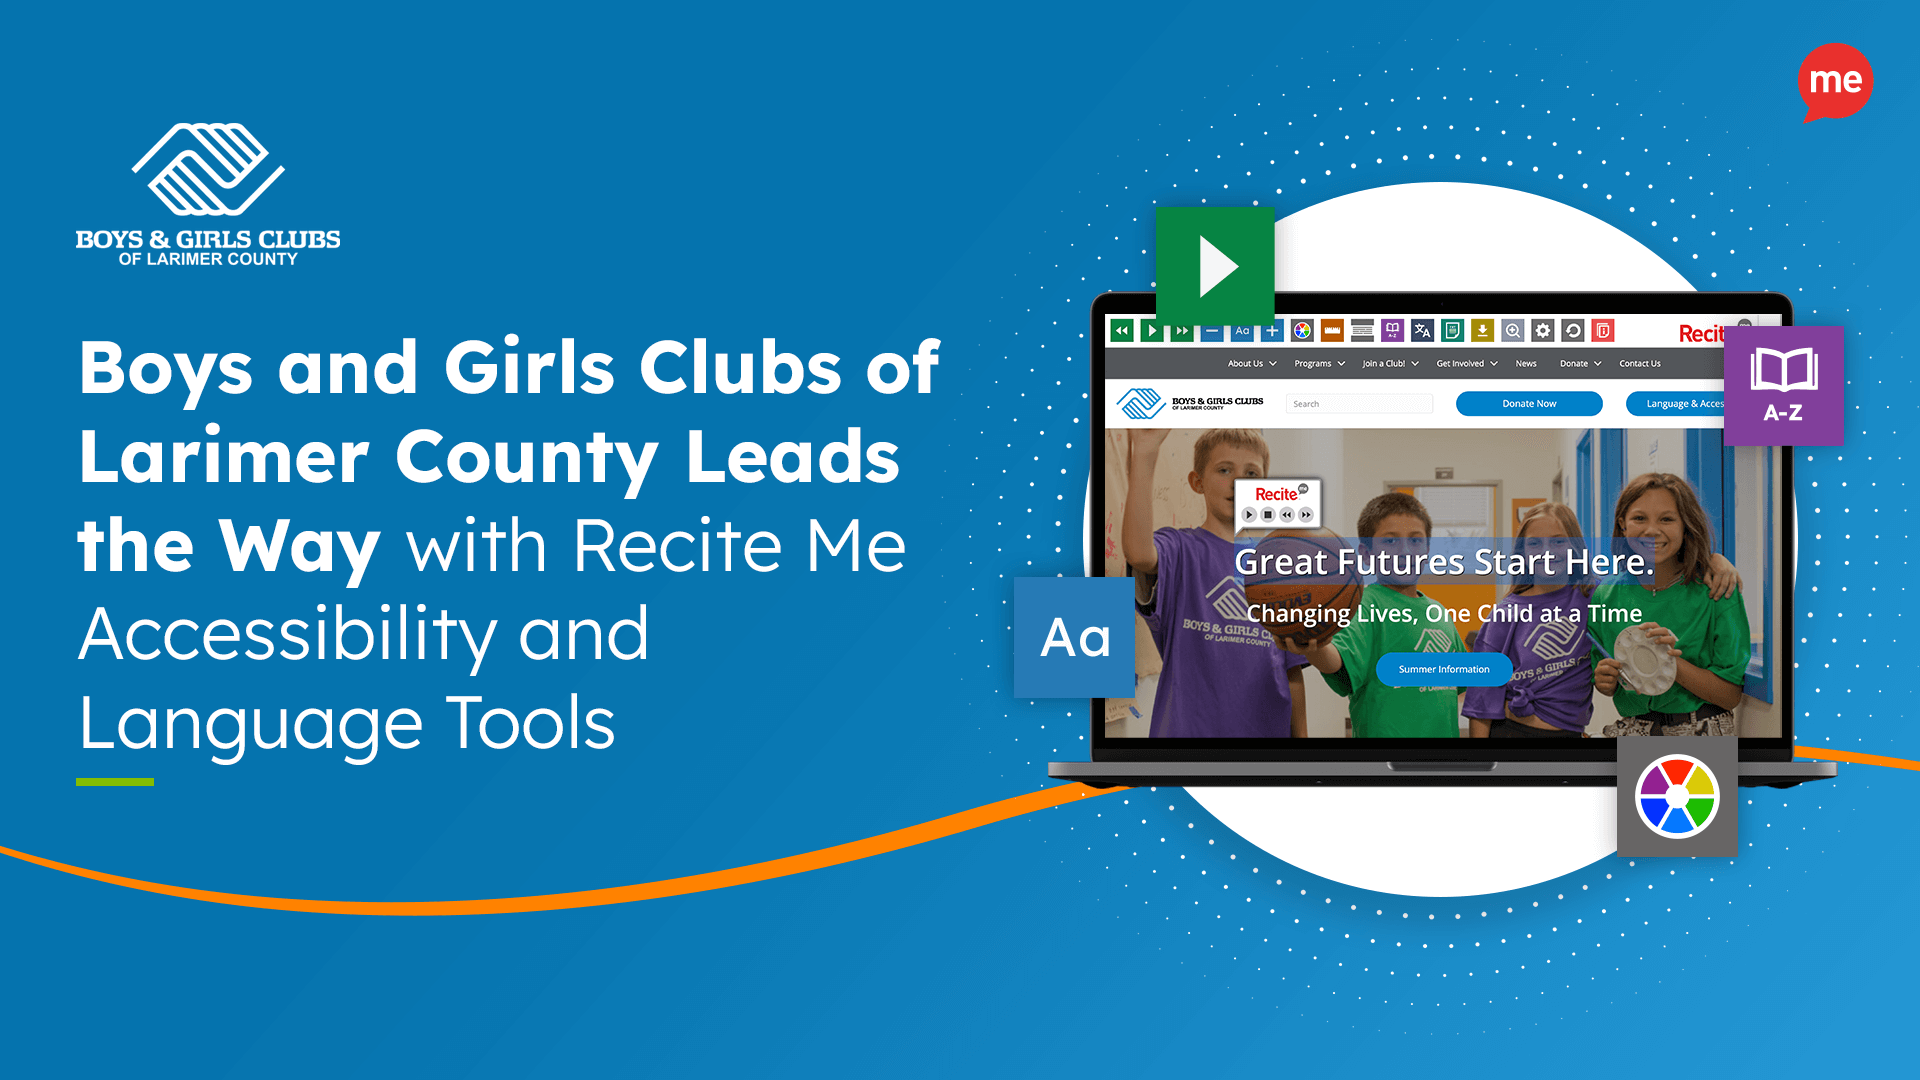 Boys and Girls Clubs of Larimer County Leads the Way with Recite Me Accessibility and Language Tools with screenshot of https://begreatlarimer.org/ website.